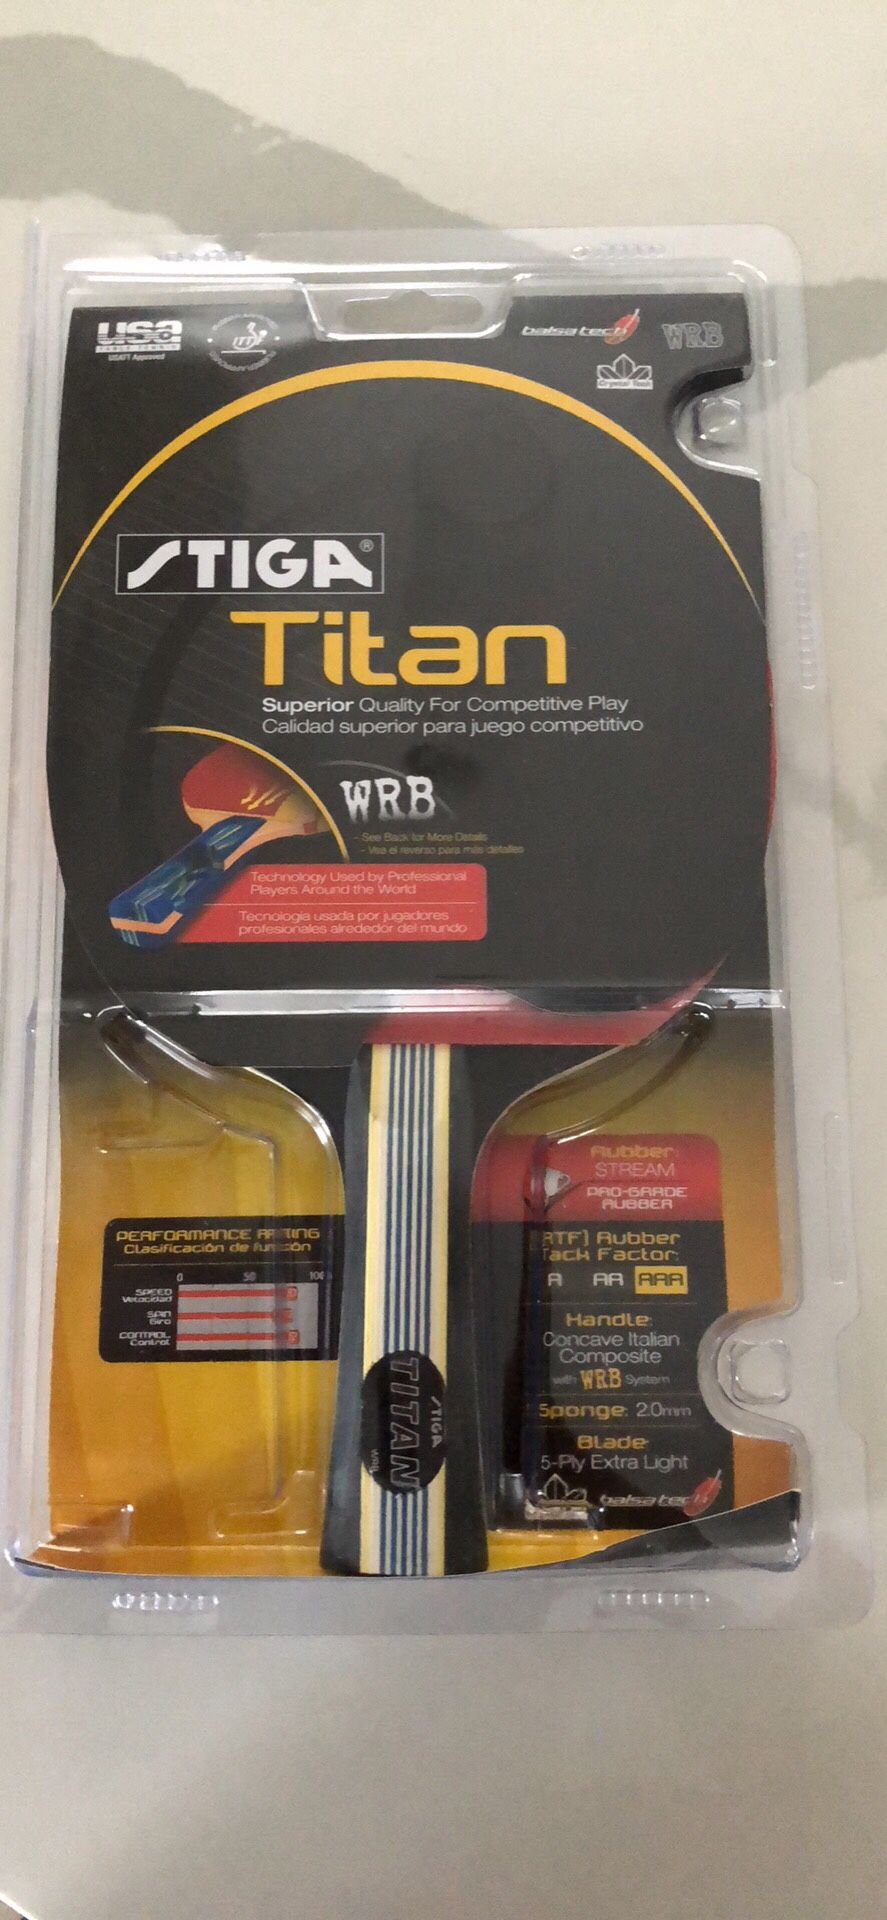 STIGA Tournament-Quality Titan Table Tennis Racket with Crystal Technology to Harden Blade for Increased Speed, 2mm Sponge and Concave Italian Compos